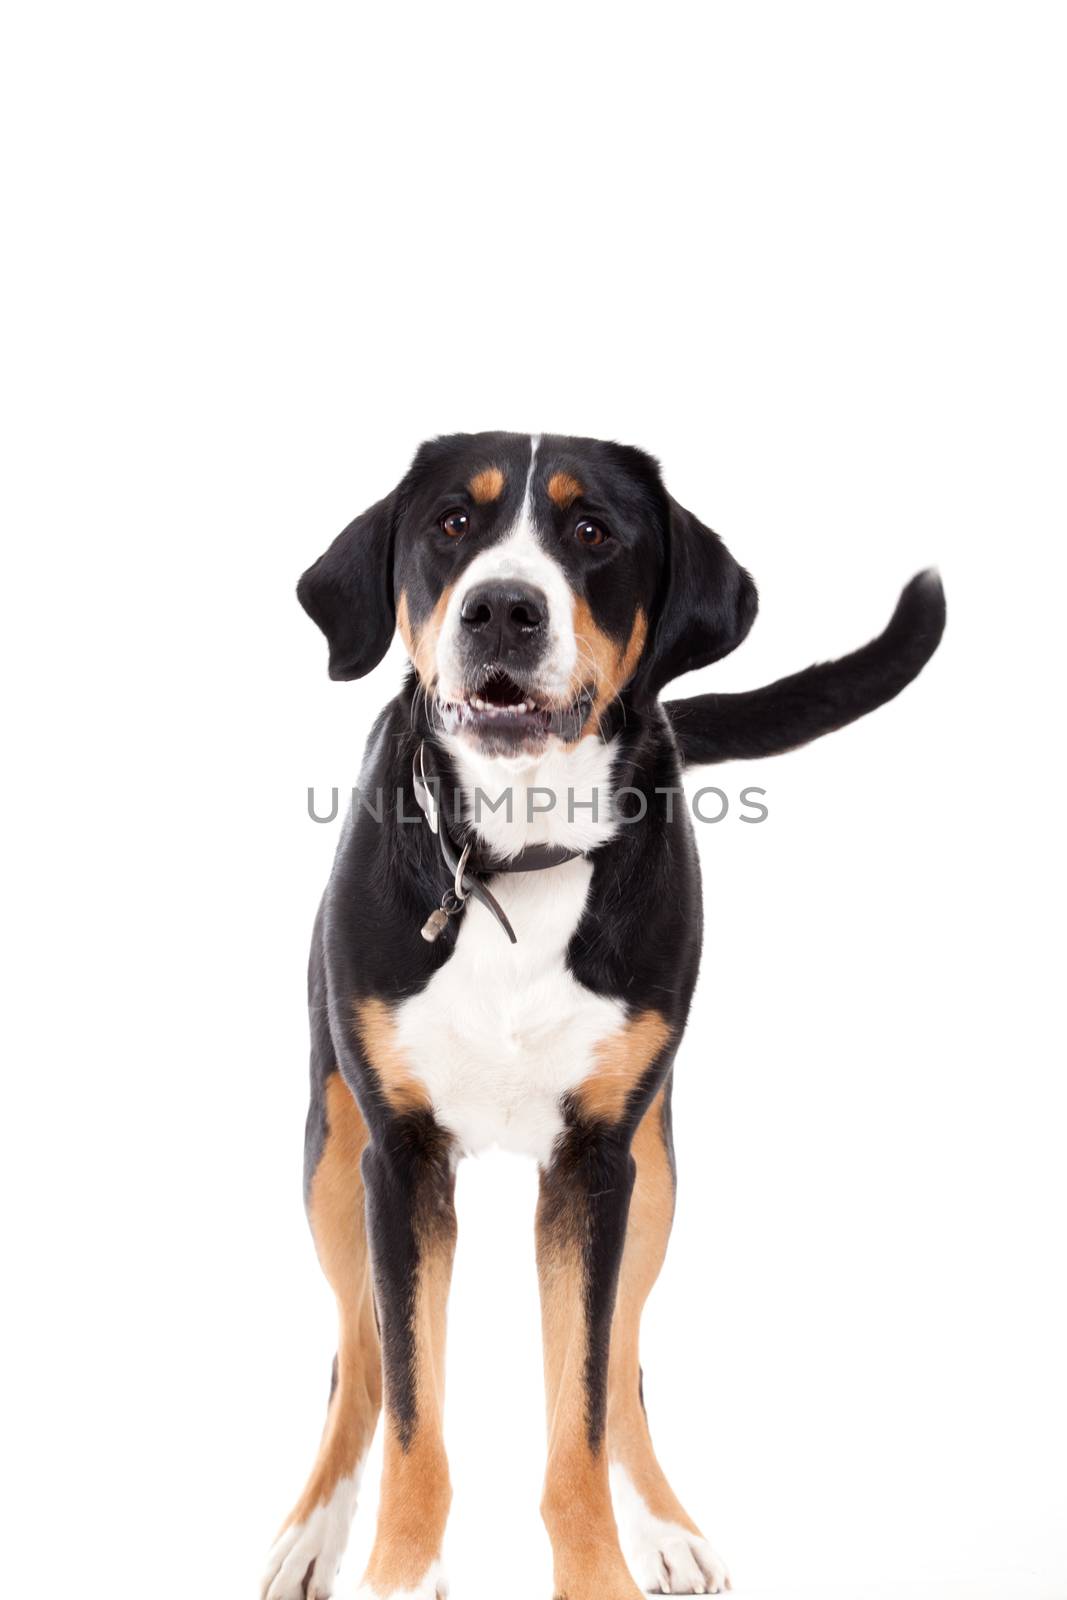 Appenzeller sennenhond standing and looking by DNFStyle